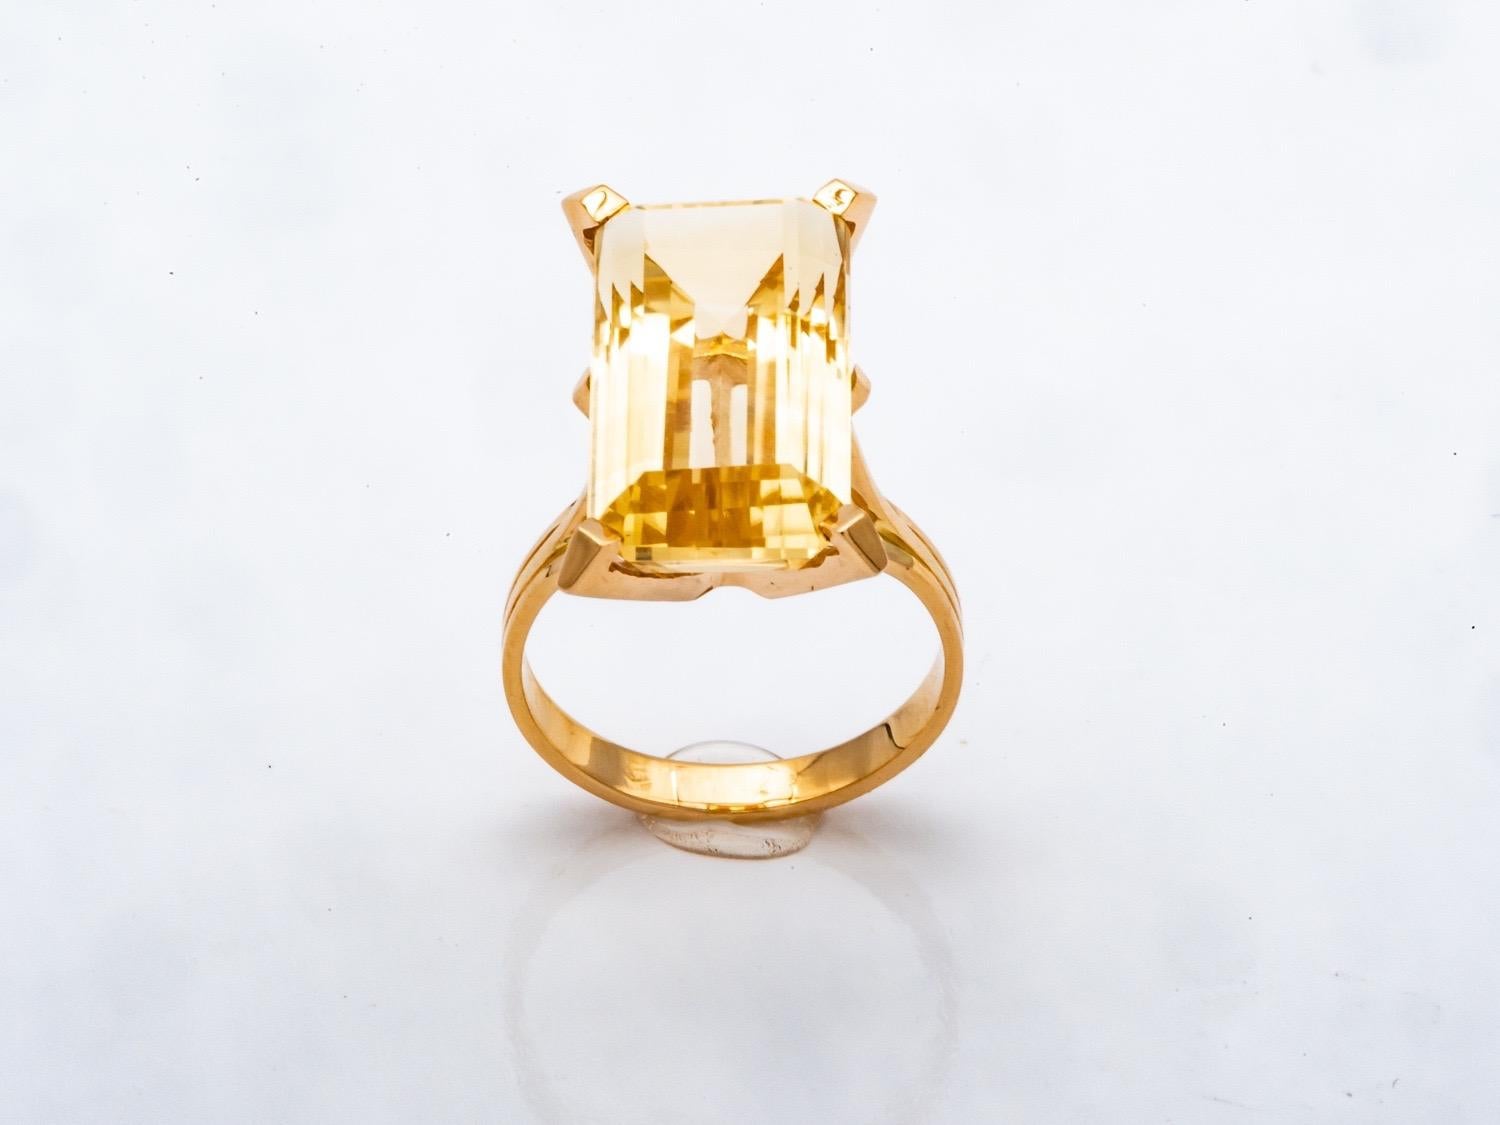 Discover this superb 18-carat yellow gold ring featuring a magnificent emerald-cut citrine. With its palette setting on a 3-row engraved band, this ring is a true piece of vintage jewelry typical of the 1960s-1970s.

The centerpiece of this ring is